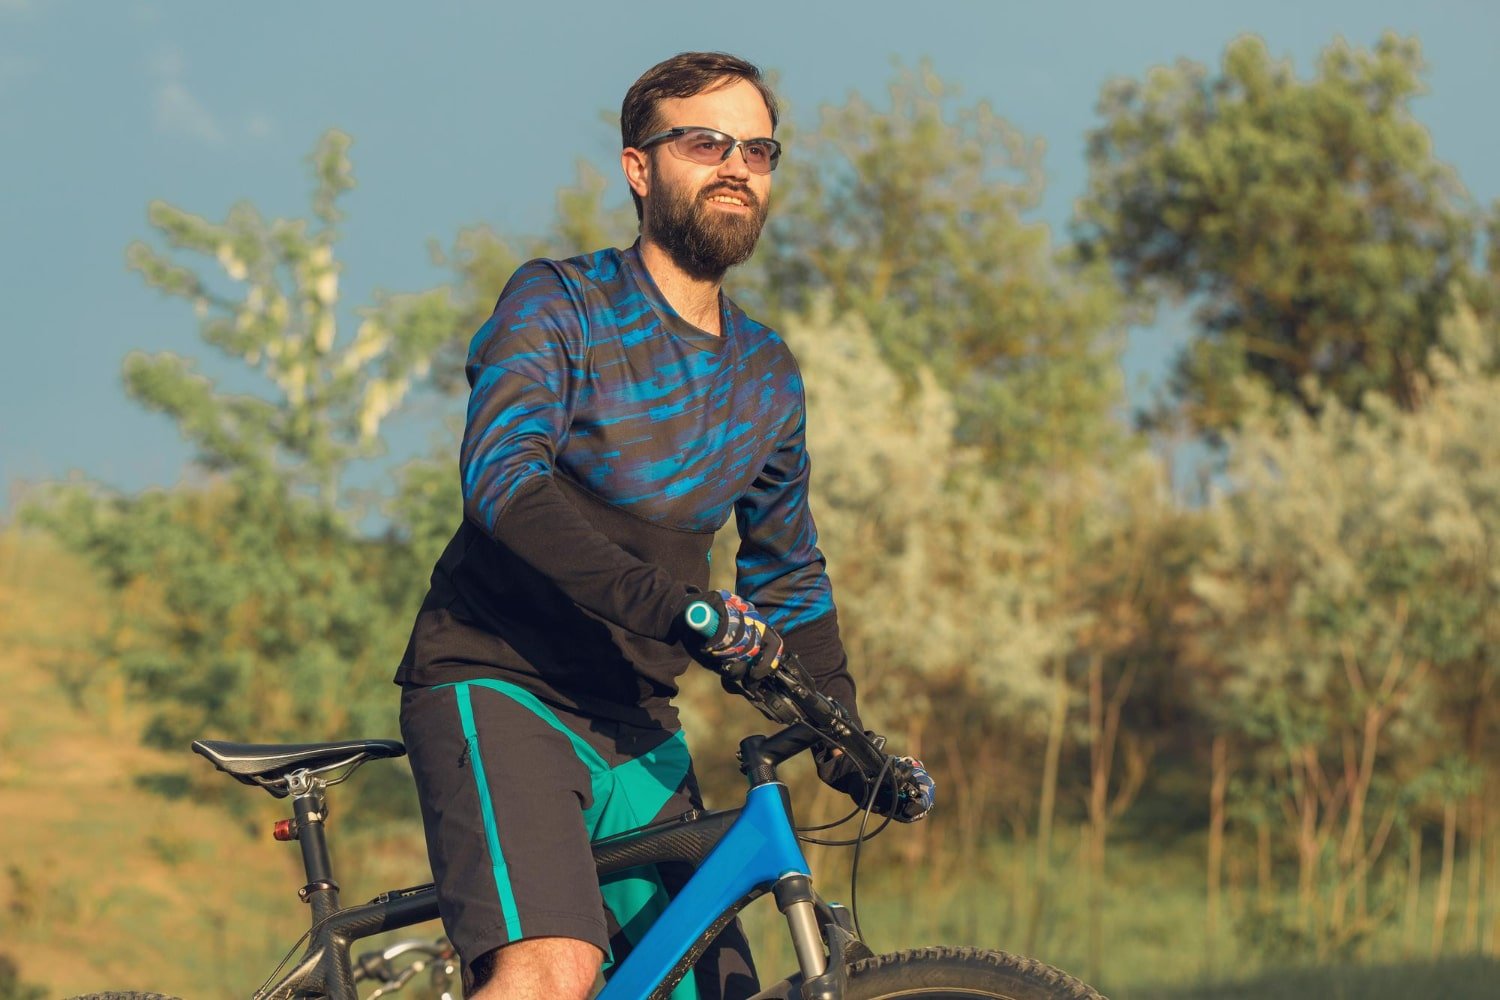 Sigr Cycling Gear with Style